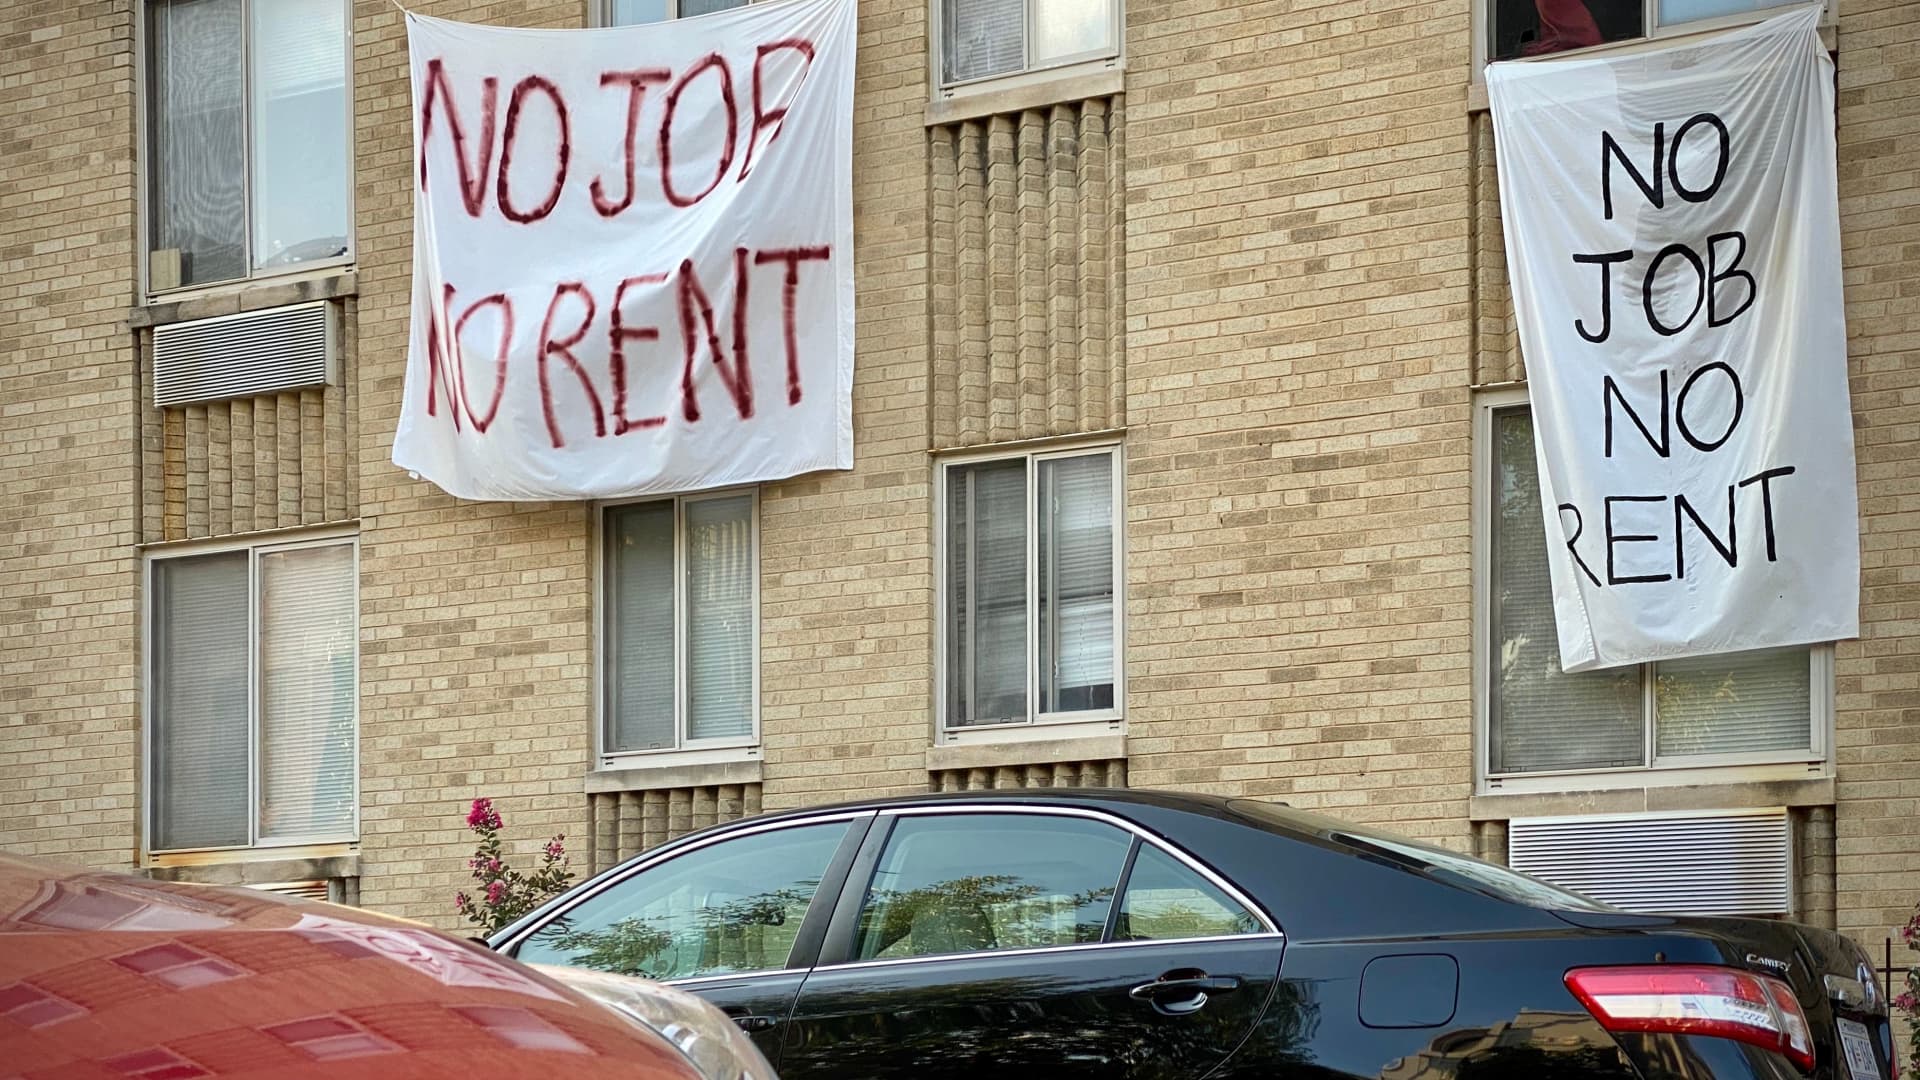 Banners against renters eviction reading no job, no rent is displayed on a controlled rent building in Washington, DC on August 9, 2020.